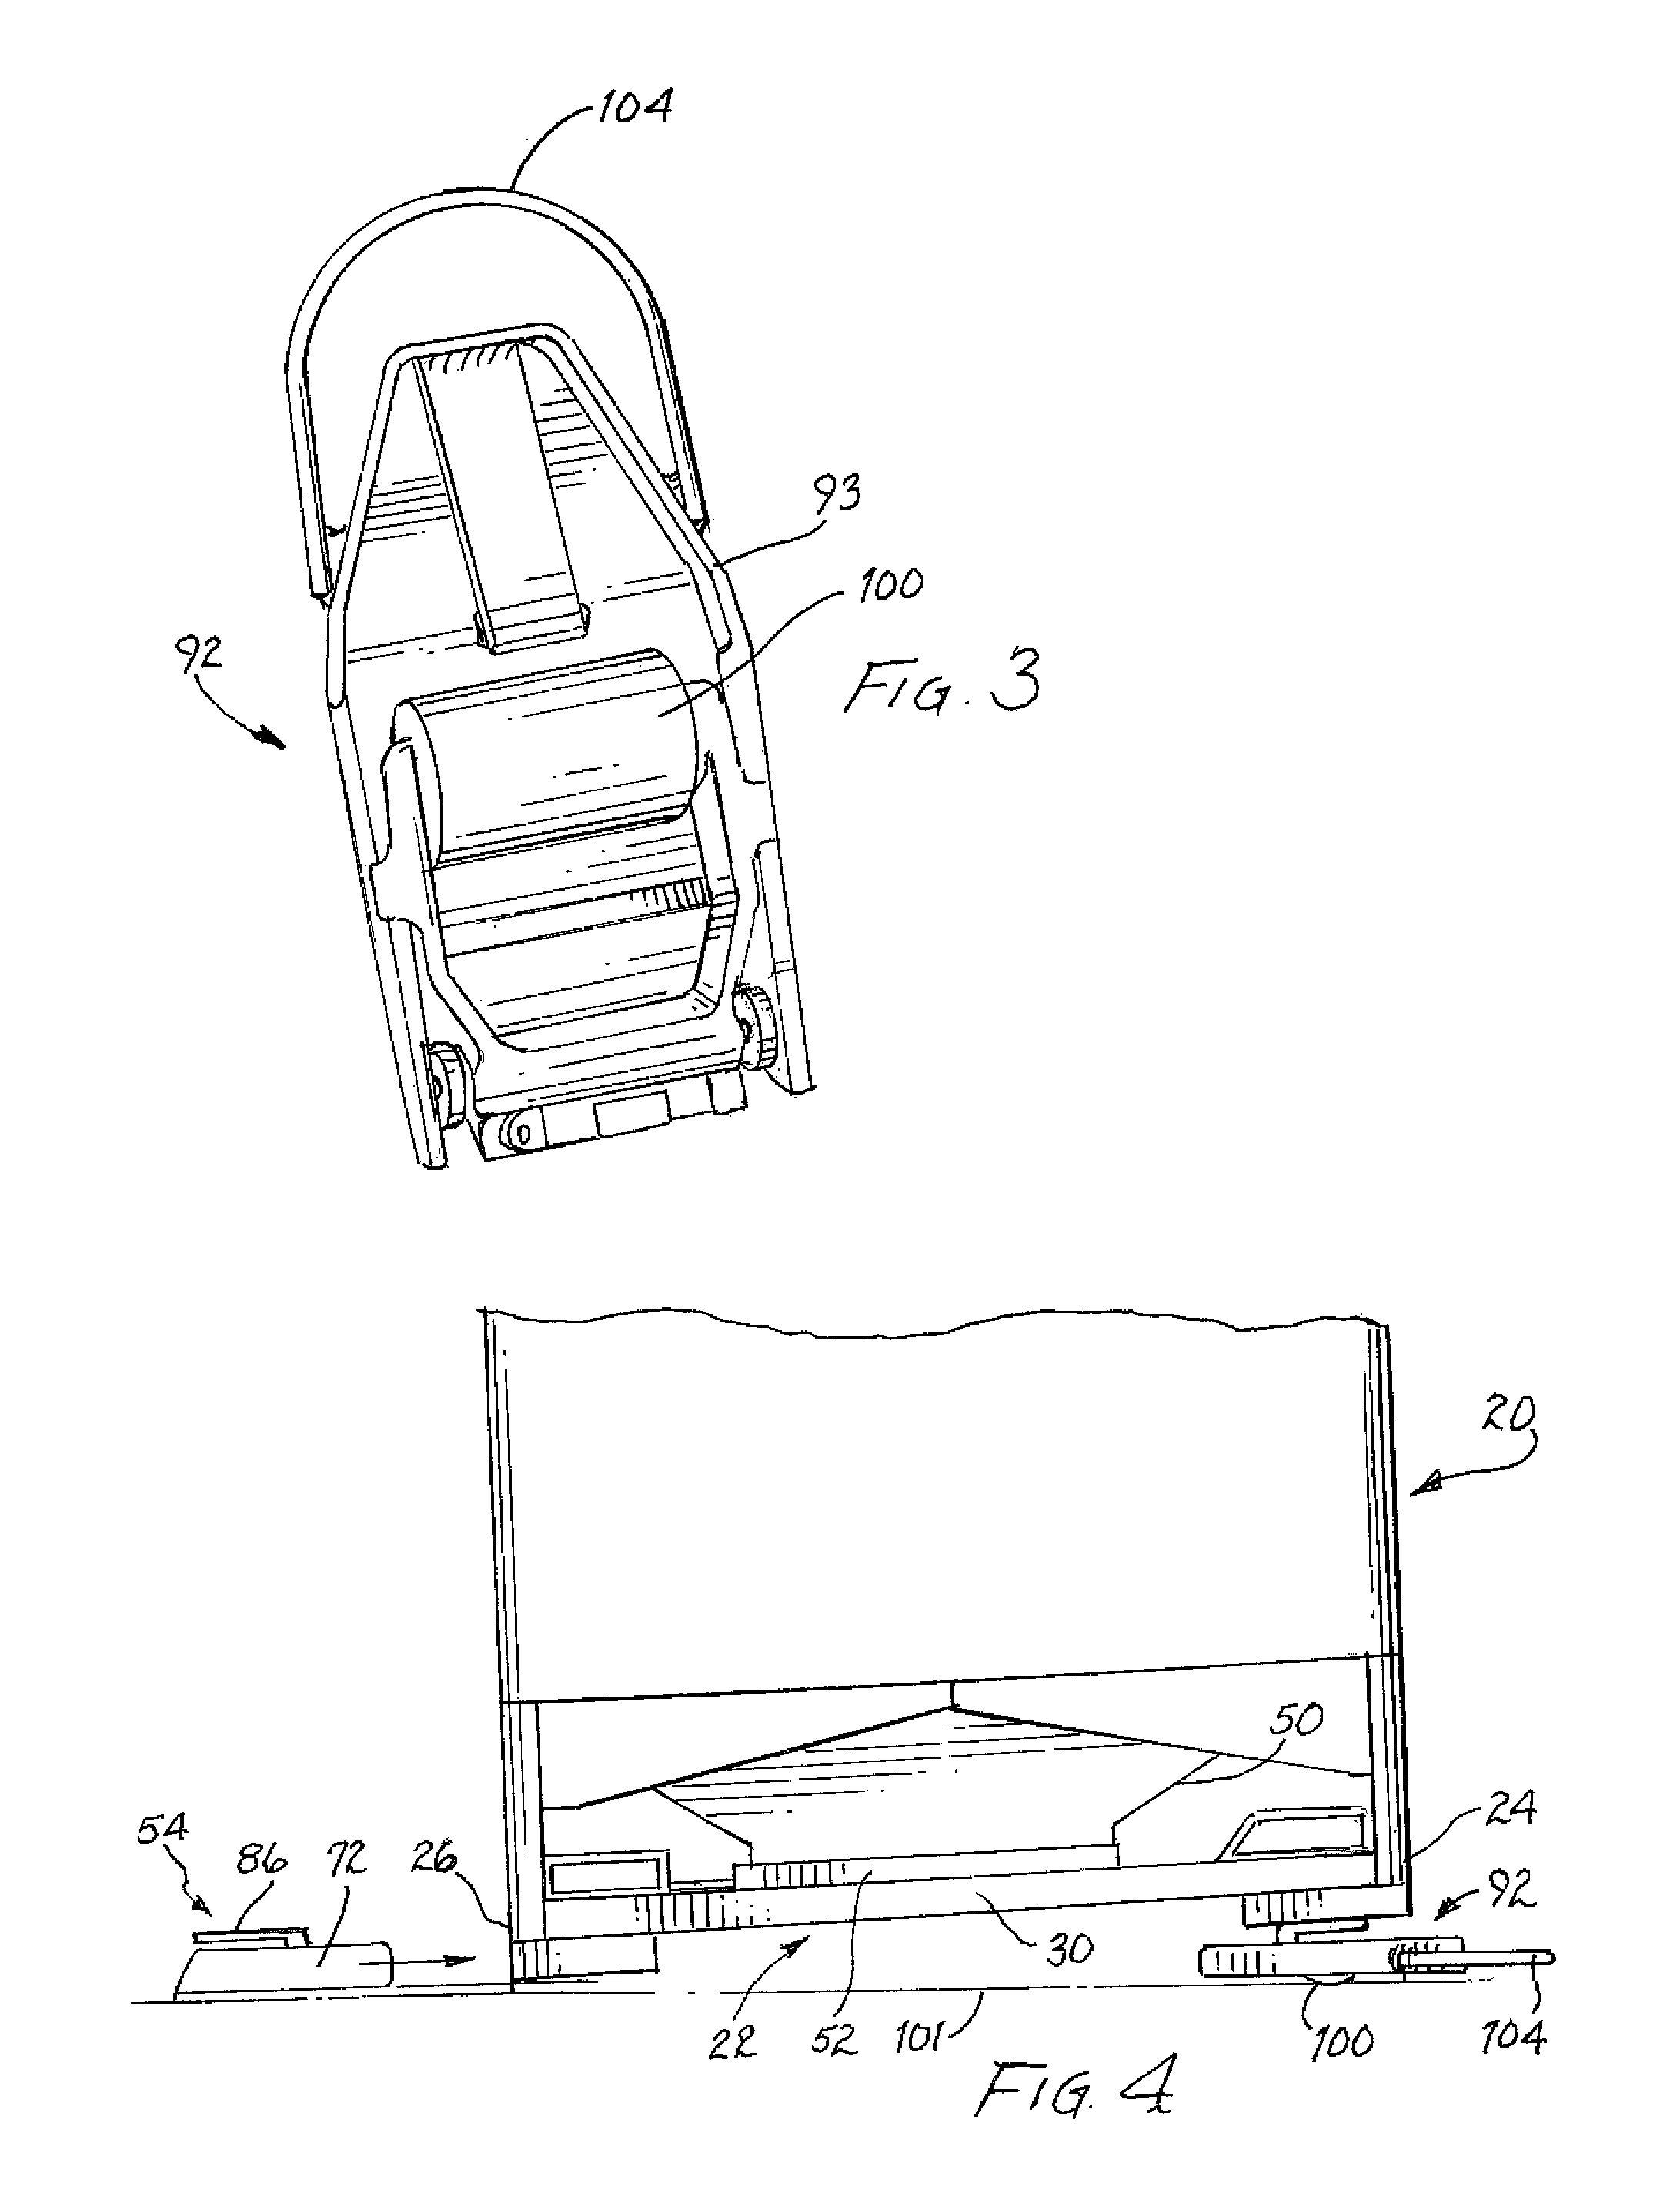 Apparatus and method for moving catalyst bins